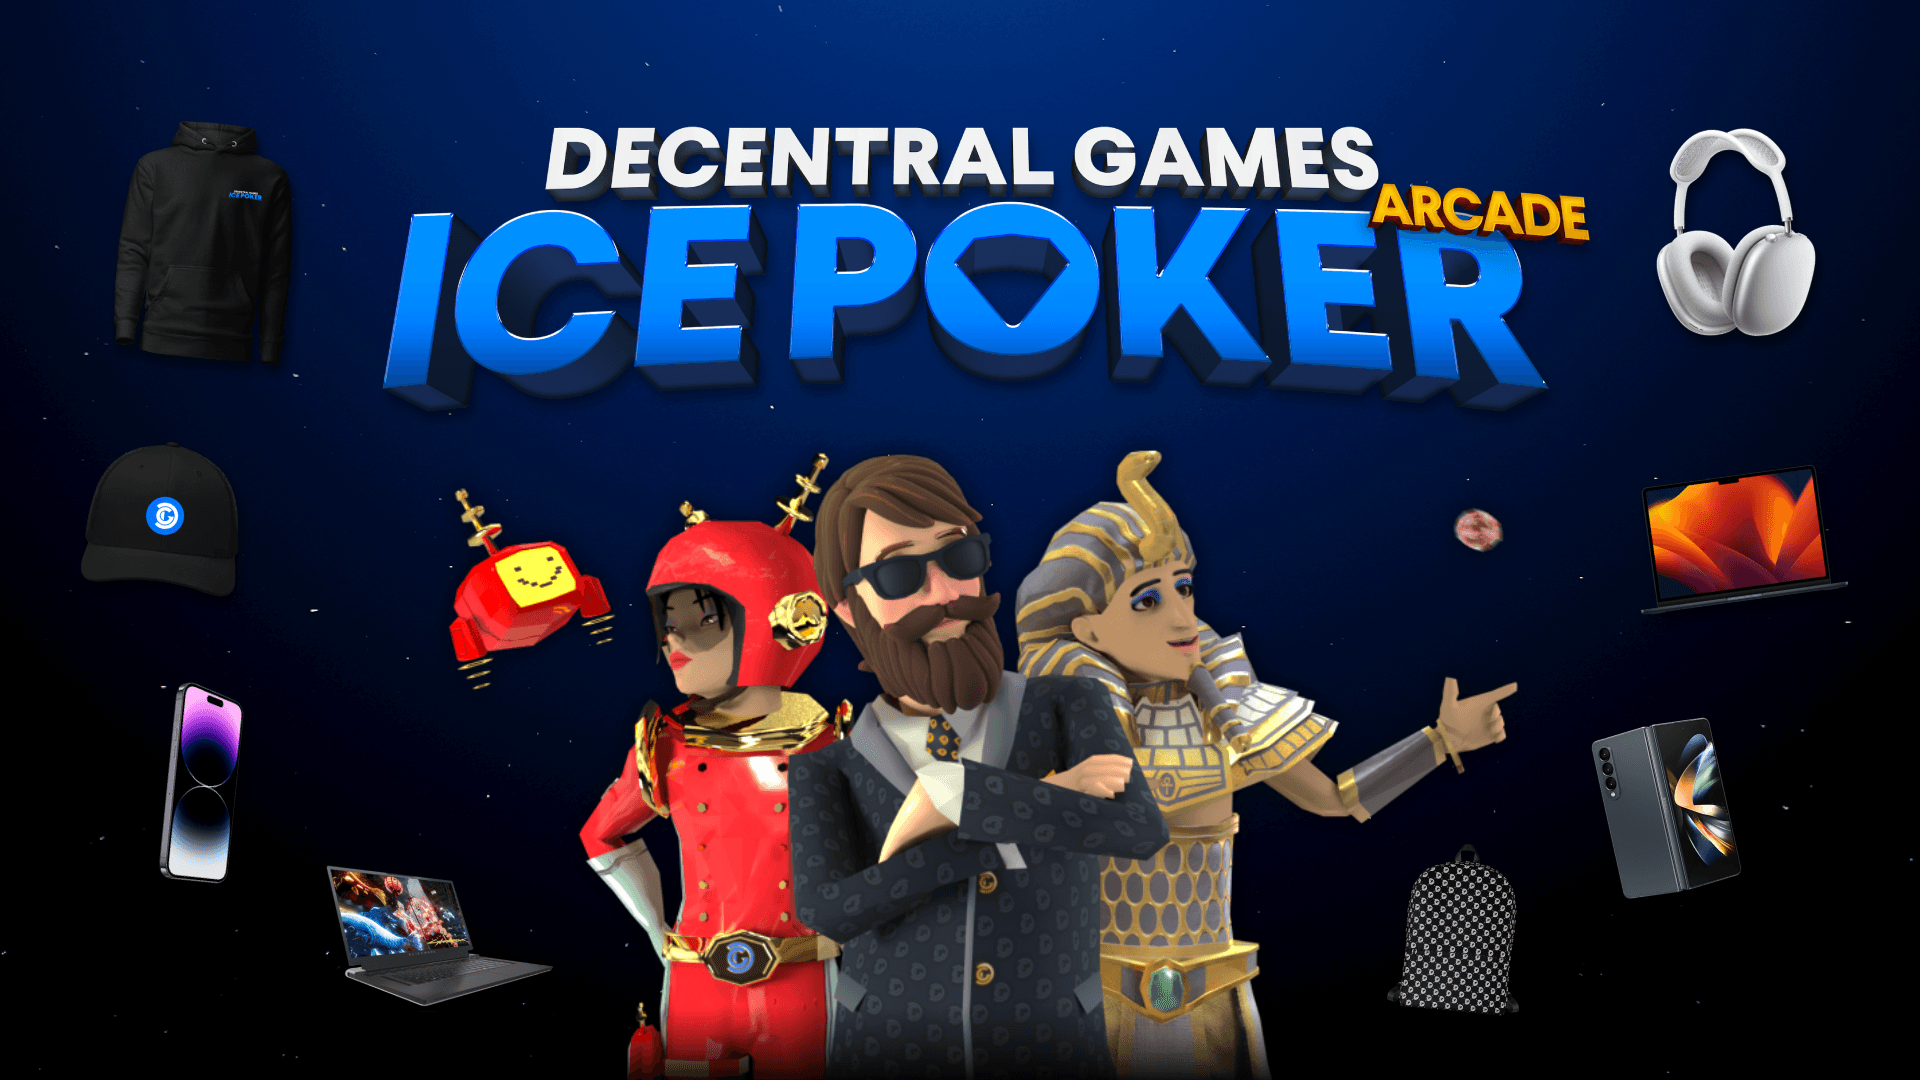 decentral games ice poker arcade.png